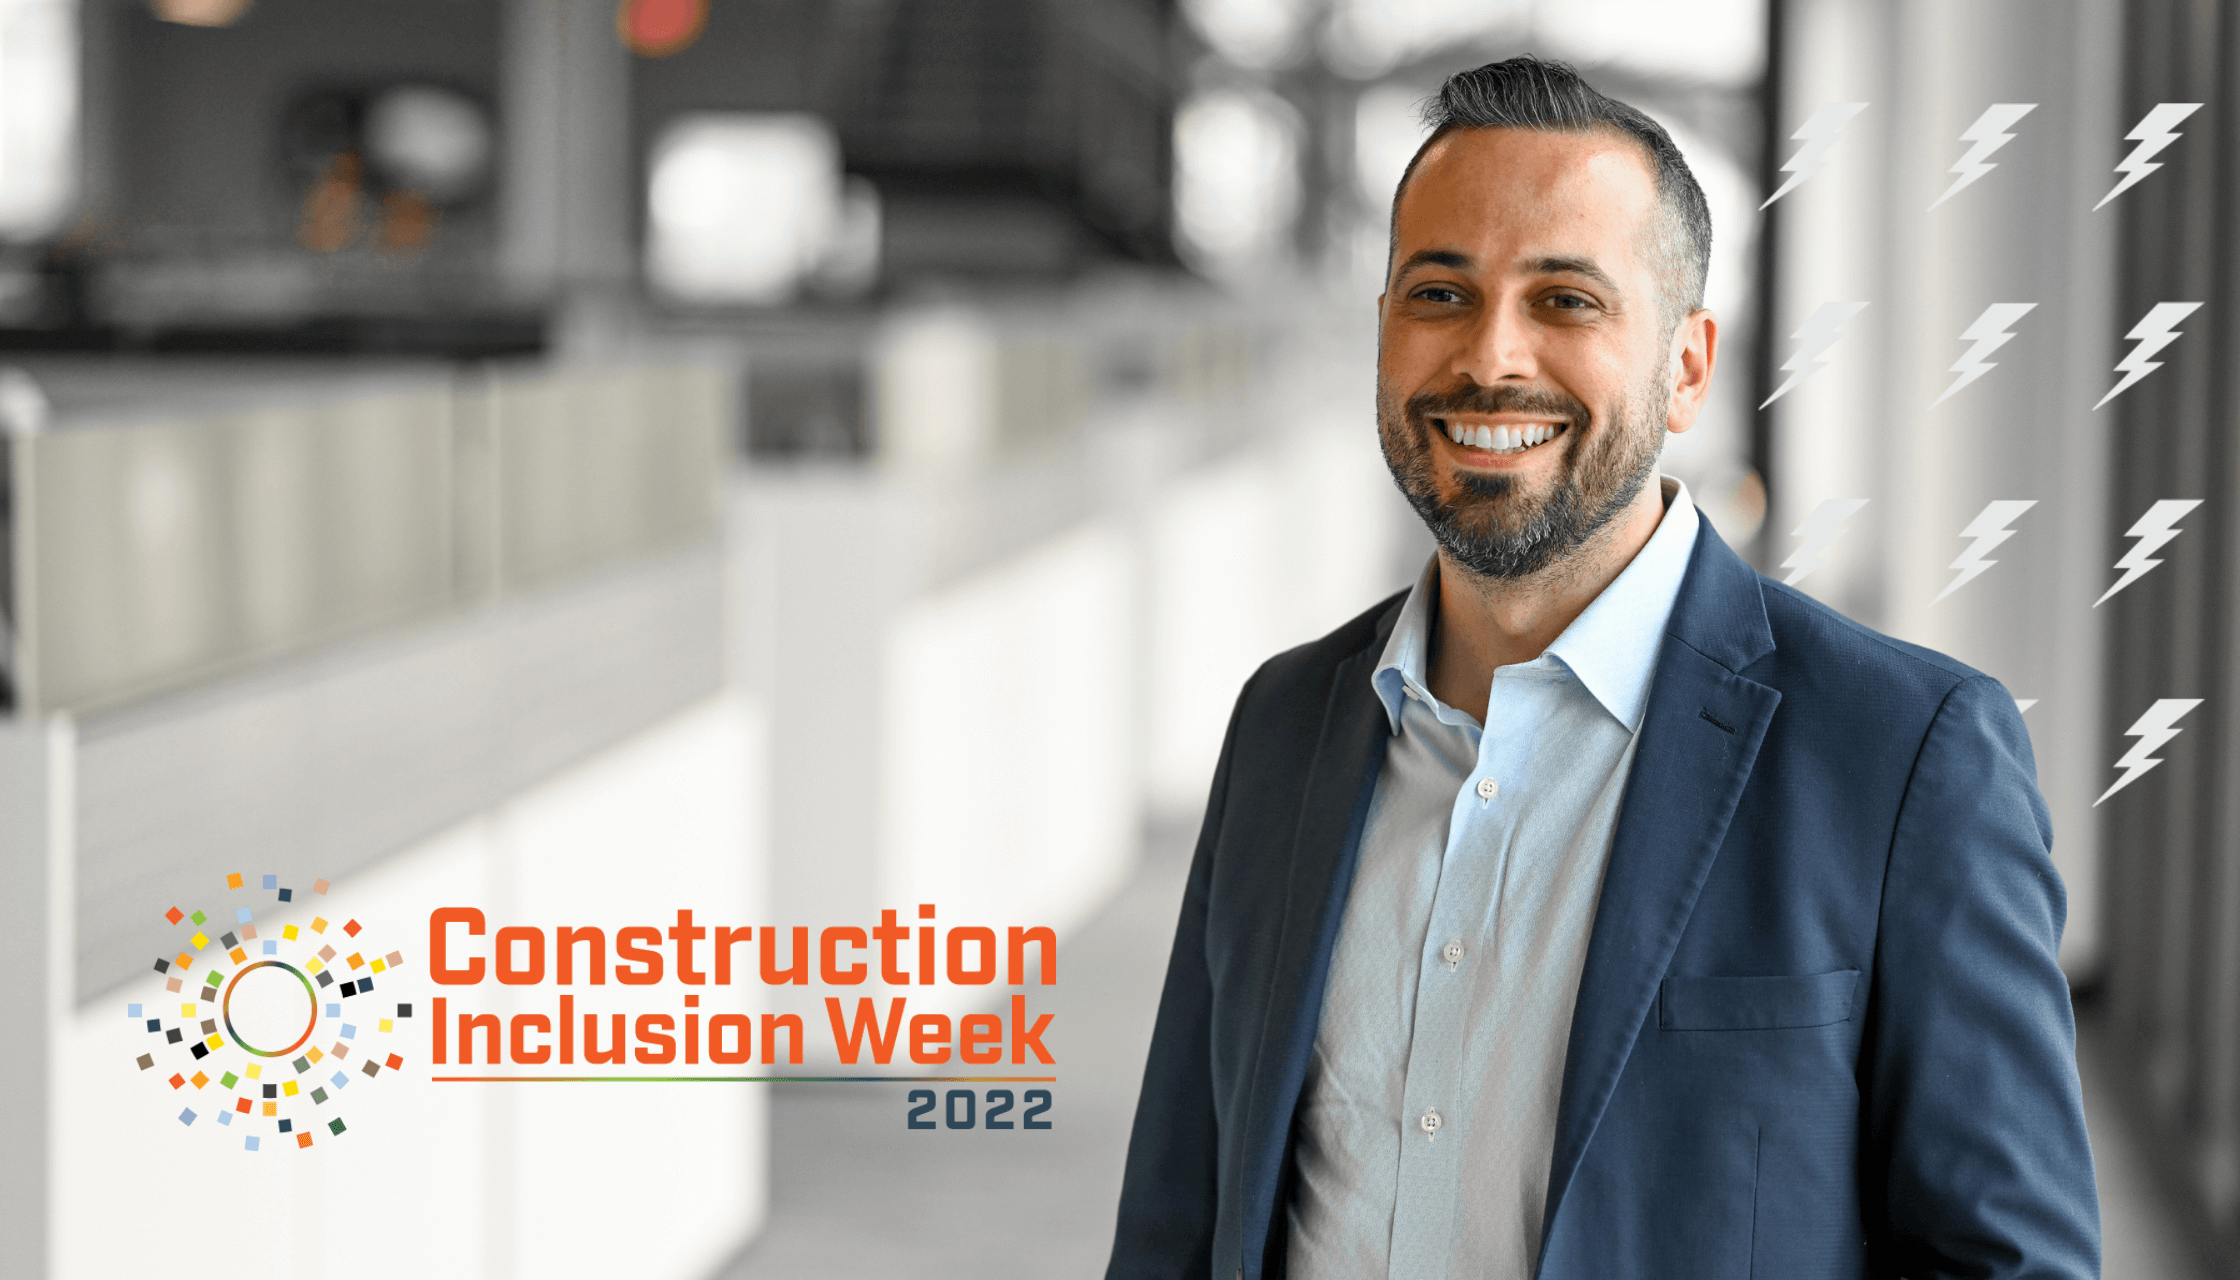 Construction Inclusion Week 2022